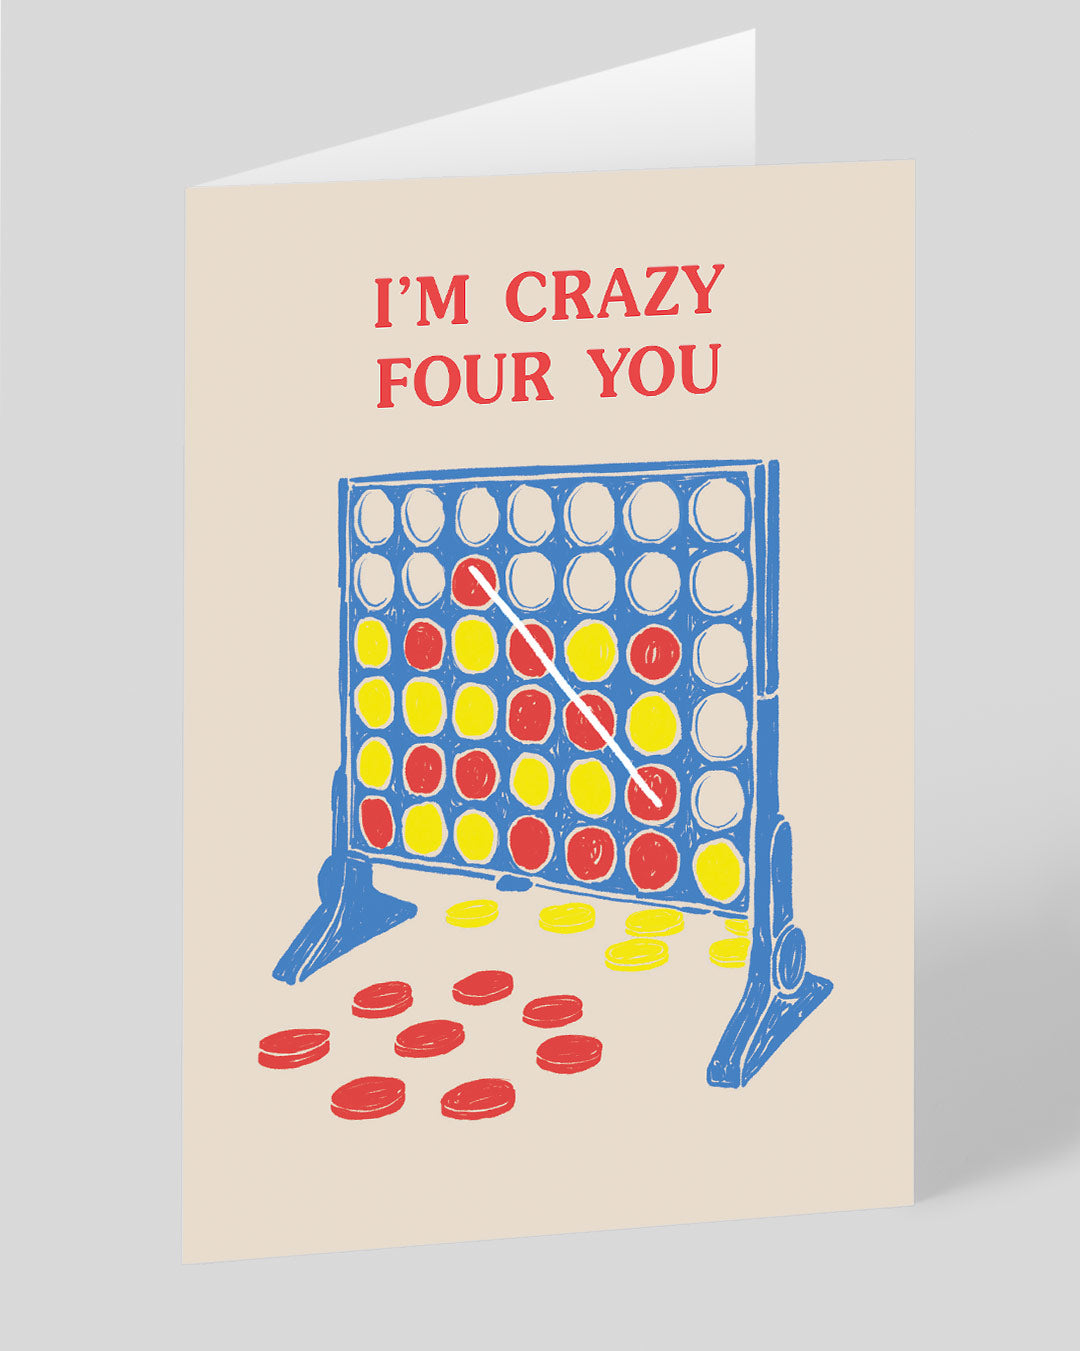 Valentine’s Day | Valentines Card For Him or Her | Crazy Four You Greeting Card | Ohh Deer Unique Valentine’s Card | Made In The UK, Eco-Friendly Materials, Plastic Free Packaging